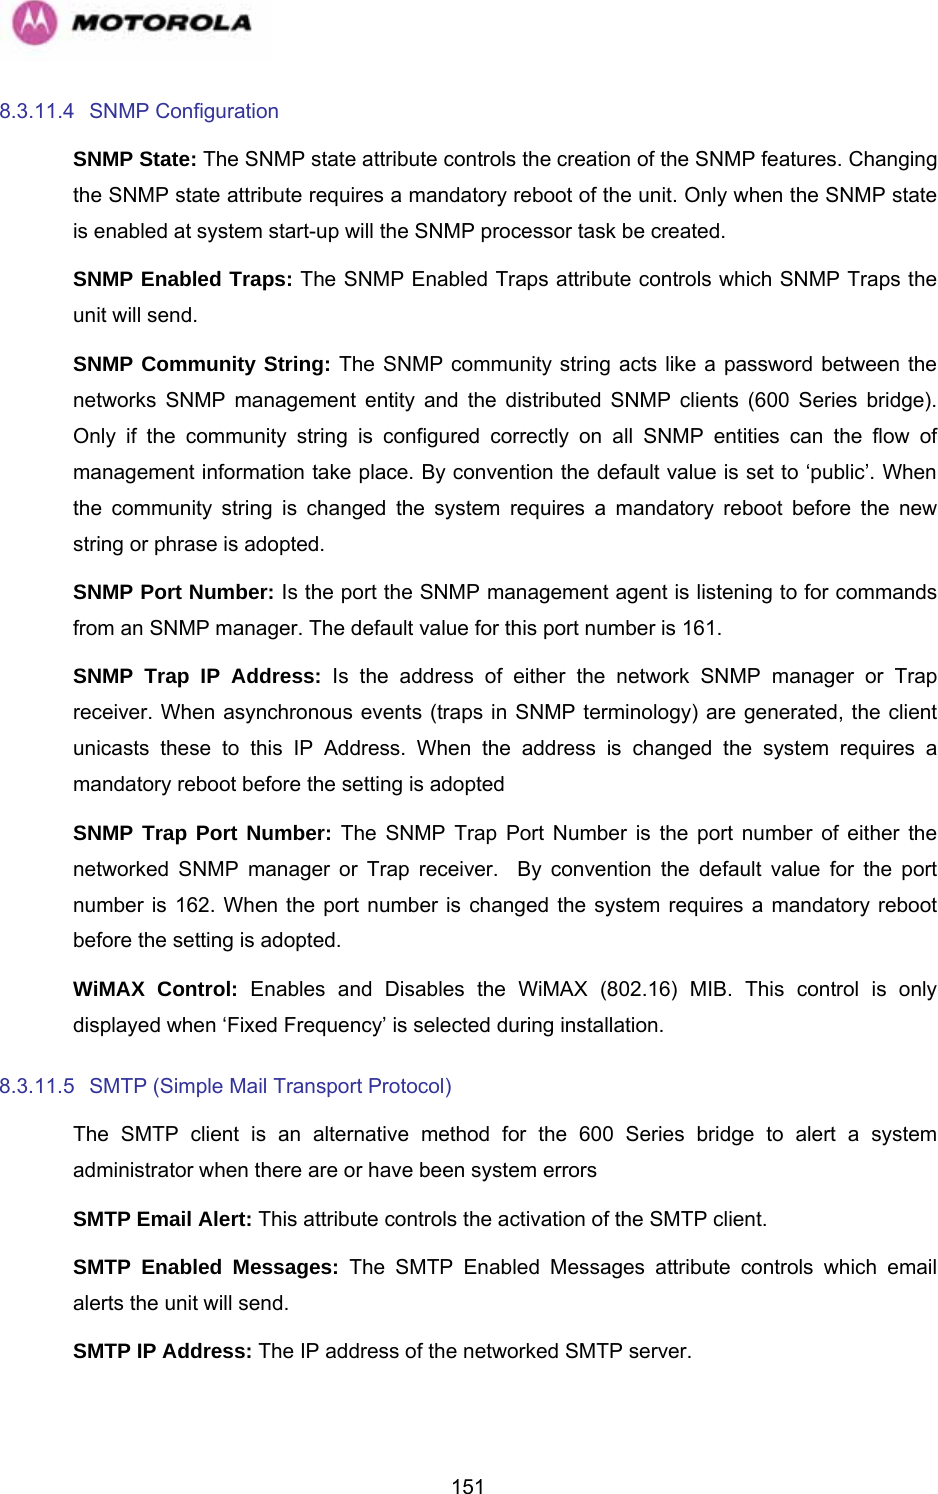   1518.3.11.4 SNMP Configuration SNMP State: The SNMP state attribute controls the creation of the SNMP features. Changing the SNMP state attribute requires a mandatory reboot of the unit. Only when the SNMP state is enabled at system start-up will the SNMP processor task be created. SNMP Enabled Traps: The SNMP Enabled Traps attribute controls which SNMP Traps the unit will send. SNMP Community String: The SNMP community string acts like a password between the networks SNMP management entity and the distributed SNMP clients (600 Series bridge). Only if the community string is configured correctly on all SNMP entities can the flow of management information take place. By convention the default value is set to ‘public’. When the community string is changed the system requires a mandatory reboot before the new string or phrase is adopted. SNMP Port Number: Is the port the SNMP management agent is listening to for commands from an SNMP manager. The default value for this port number is 161. SNMP Trap IP Address: Is the address of either the network SNMP manager or Trap receiver. When asynchronous events (traps in SNMP terminology) are generated, the client unicasts these to this IP Address. When the address is changed the system requires a mandatory reboot before the setting is adopted SNMP Trap Port Number: The SNMP Trap Port Number is the port number of either the networked SNMP manager or Trap receiver.  By convention the default value for the port number is 162. When the port number is changed the system requires a mandatory reboot before the setting is adopted. WiMAX Control: Enables and Disables the WiMAX (802.16) MIB. This control is only displayed when ‘Fixed Frequency’ is selected during installation. 8.3.11.5  SMTP (Simple Mail Transport Protocol) The SMTP client is an alternative method for the 600 Series bridge to alert a system administrator when there are or have been system errors SMTP Email Alert: This attribute controls the activation of the SMTP client. SMTP Enabled Messages: The SMTP Enabled Messages attribute controls which email alerts the unit will send. SMTP IP Address: The IP address of the networked SMTP server. 